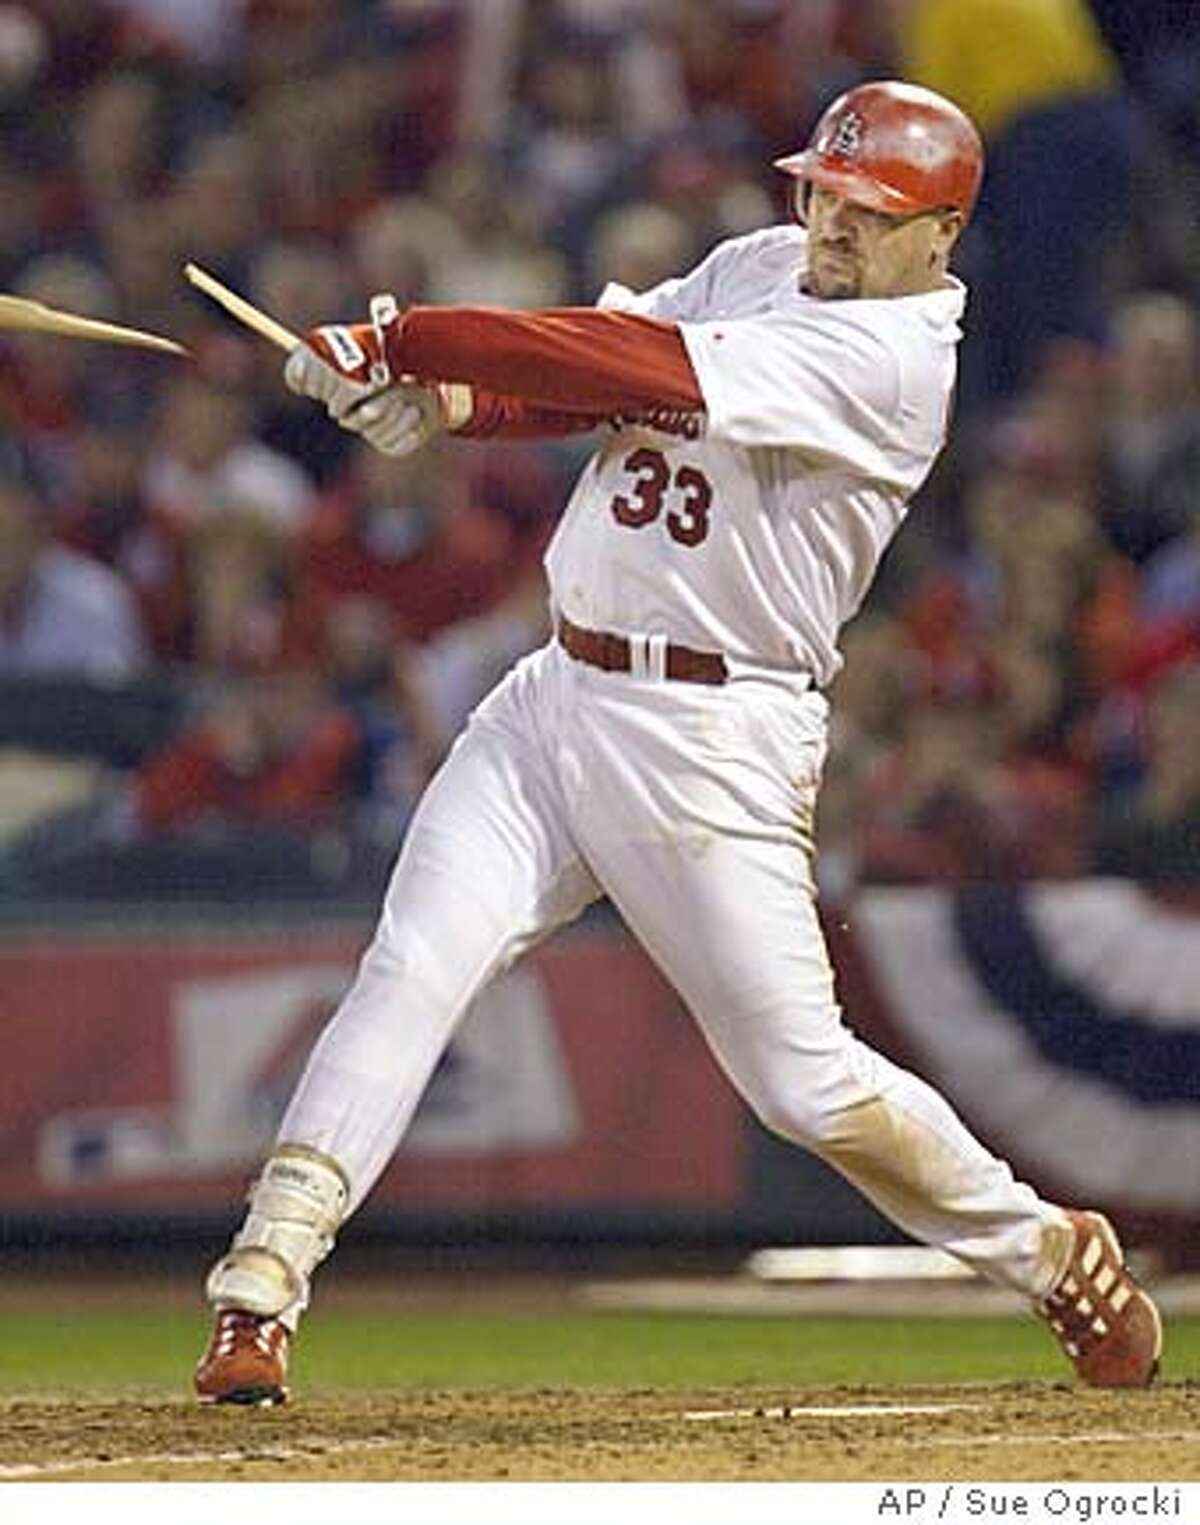 St. Louis Cardinals' Larry Walker breaks his bat as he hits a double during the fifth inning against the Houston Astros during Game 1 of the National League Championship Series at Busch Stadium in St. Louis, Wednesday, Oct. 13, 2004. (AP Photo/Sue Ogrocki) Sports#Sports#Chronicle#10/14/2004#ALL#5star##0422411898